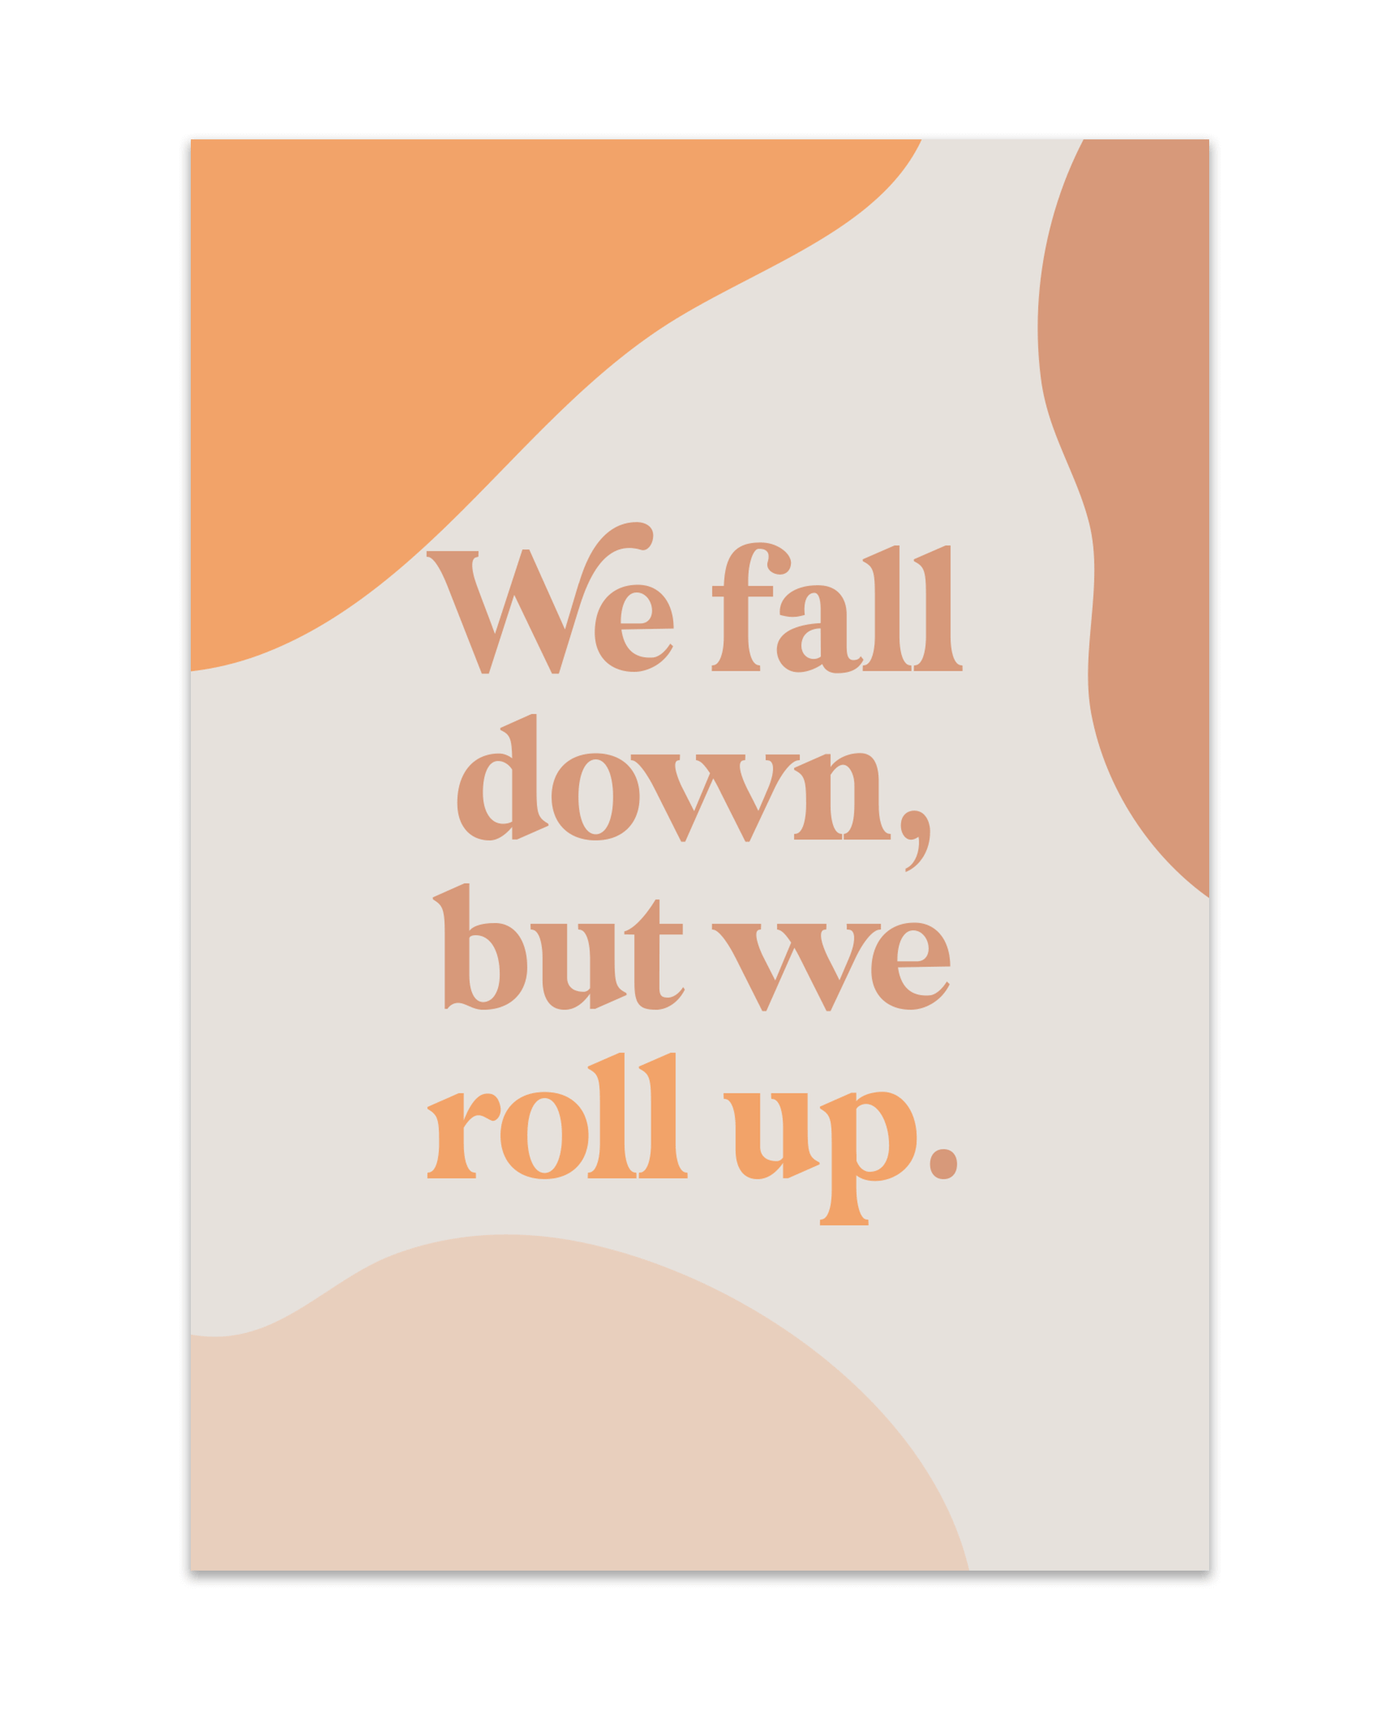 white card with orange, cream, and brown abstract illustration that reads "We fall down, but we roll up" on the cover